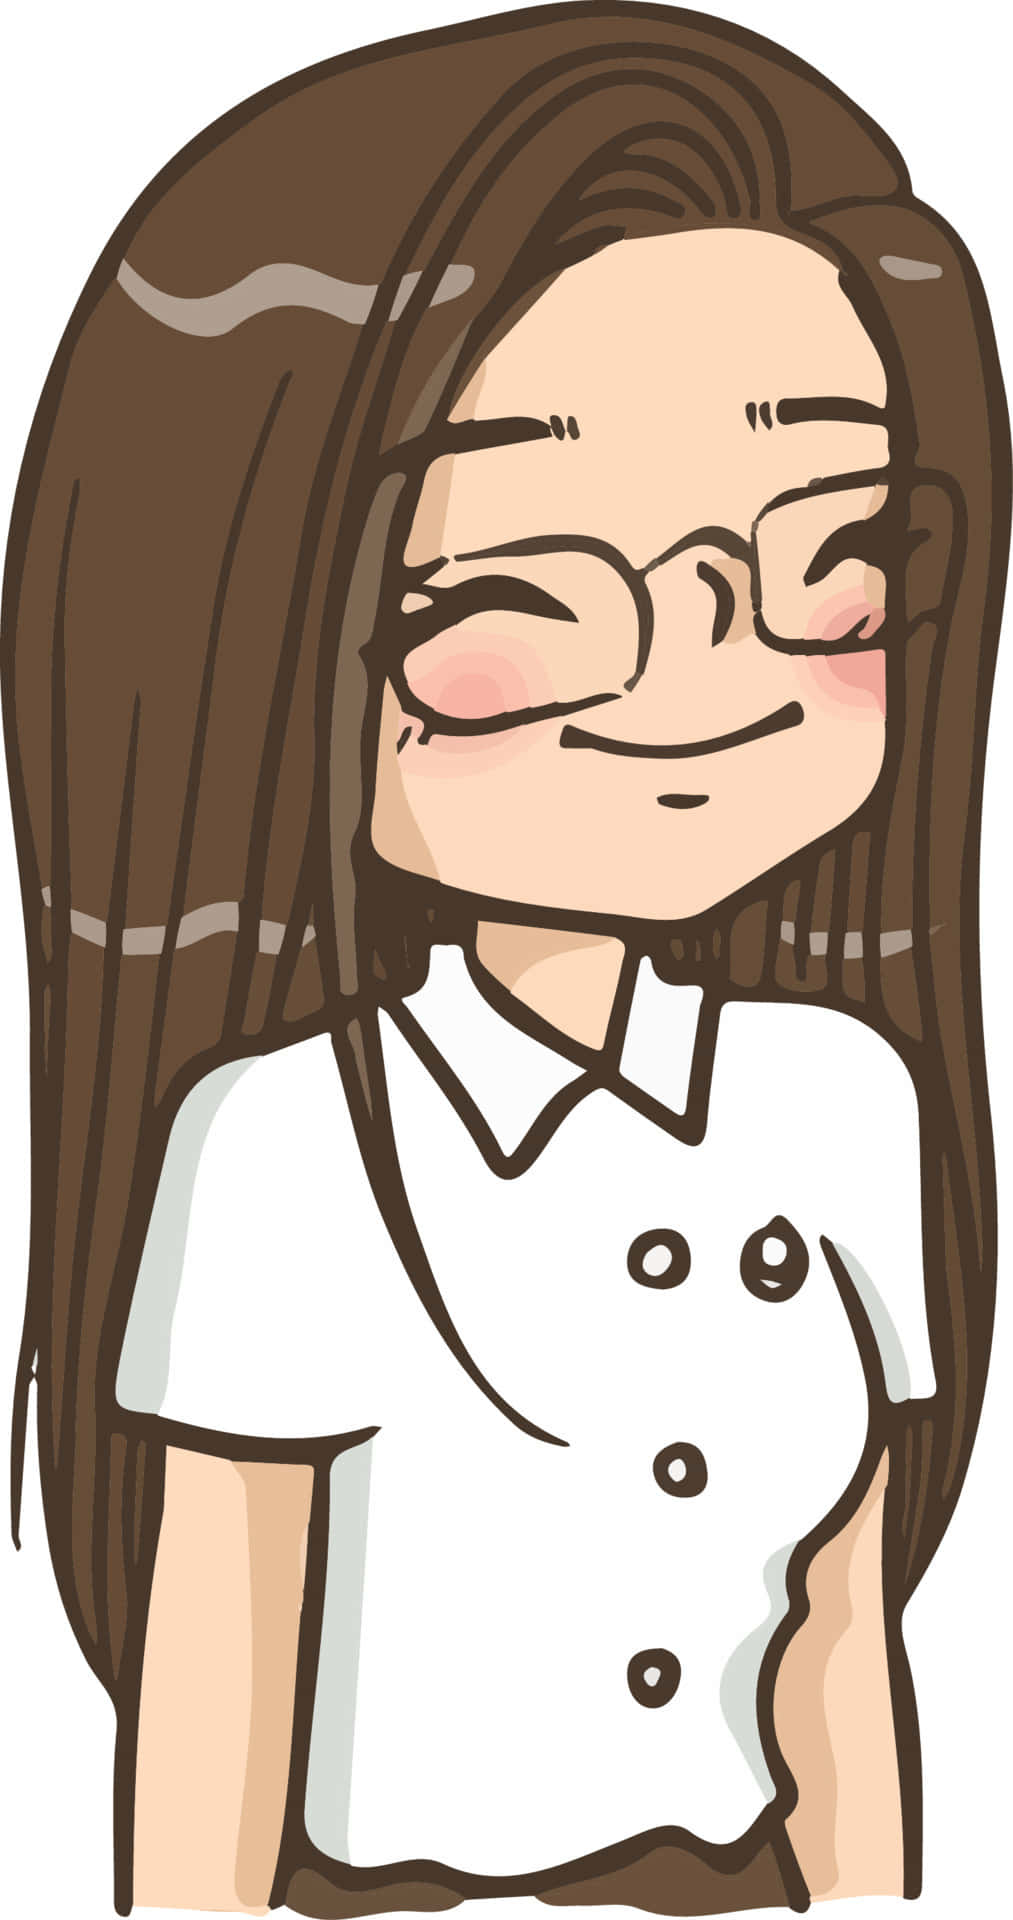 A Cartoon Girl With Glasses And A White Shirt